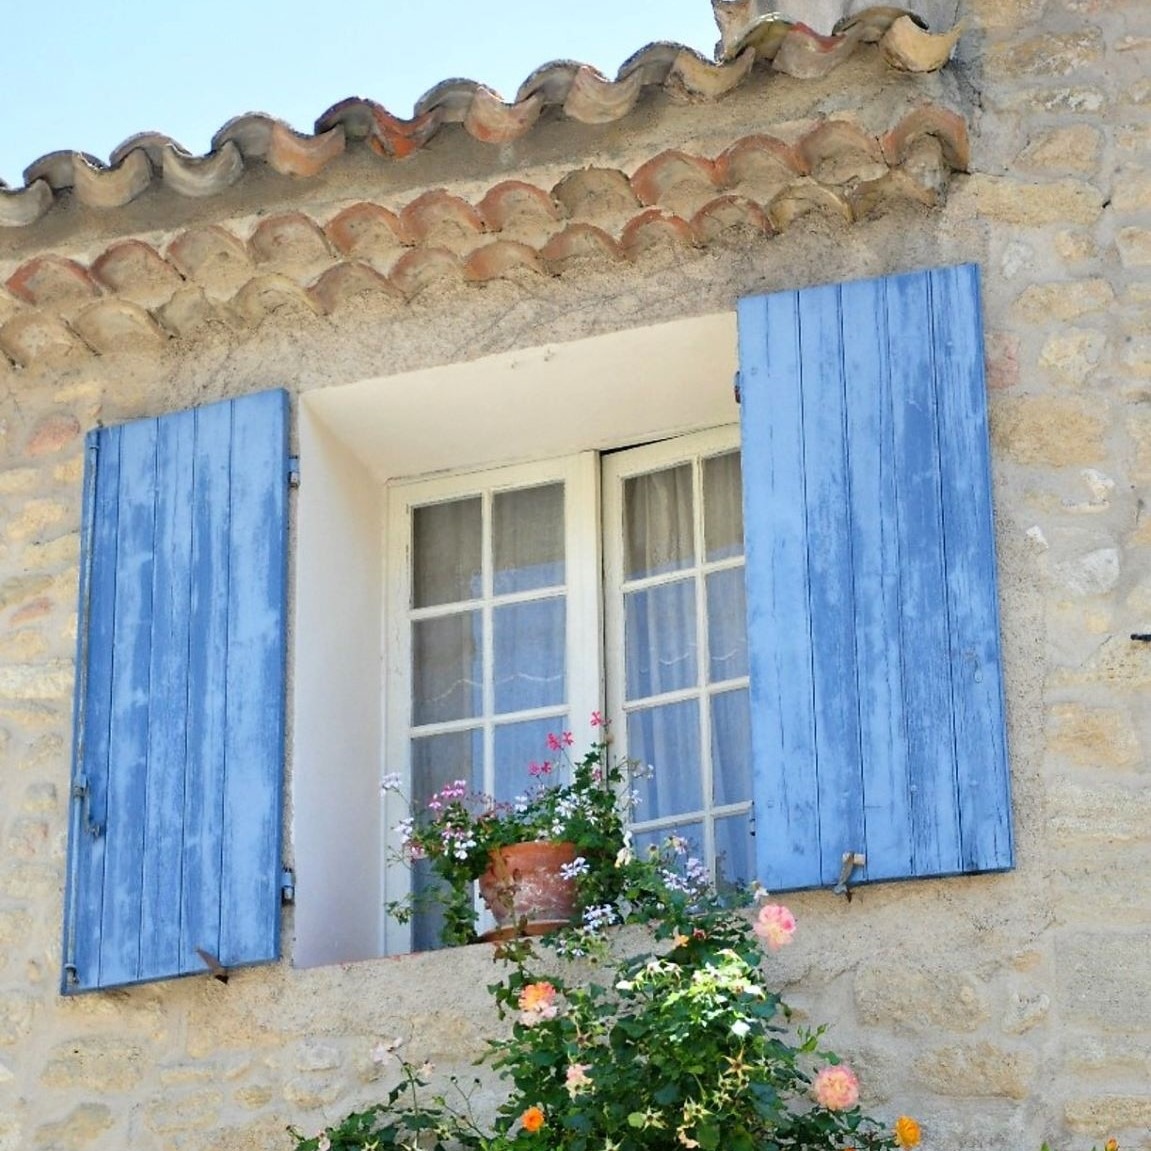 stone building with blue shutters and flowers